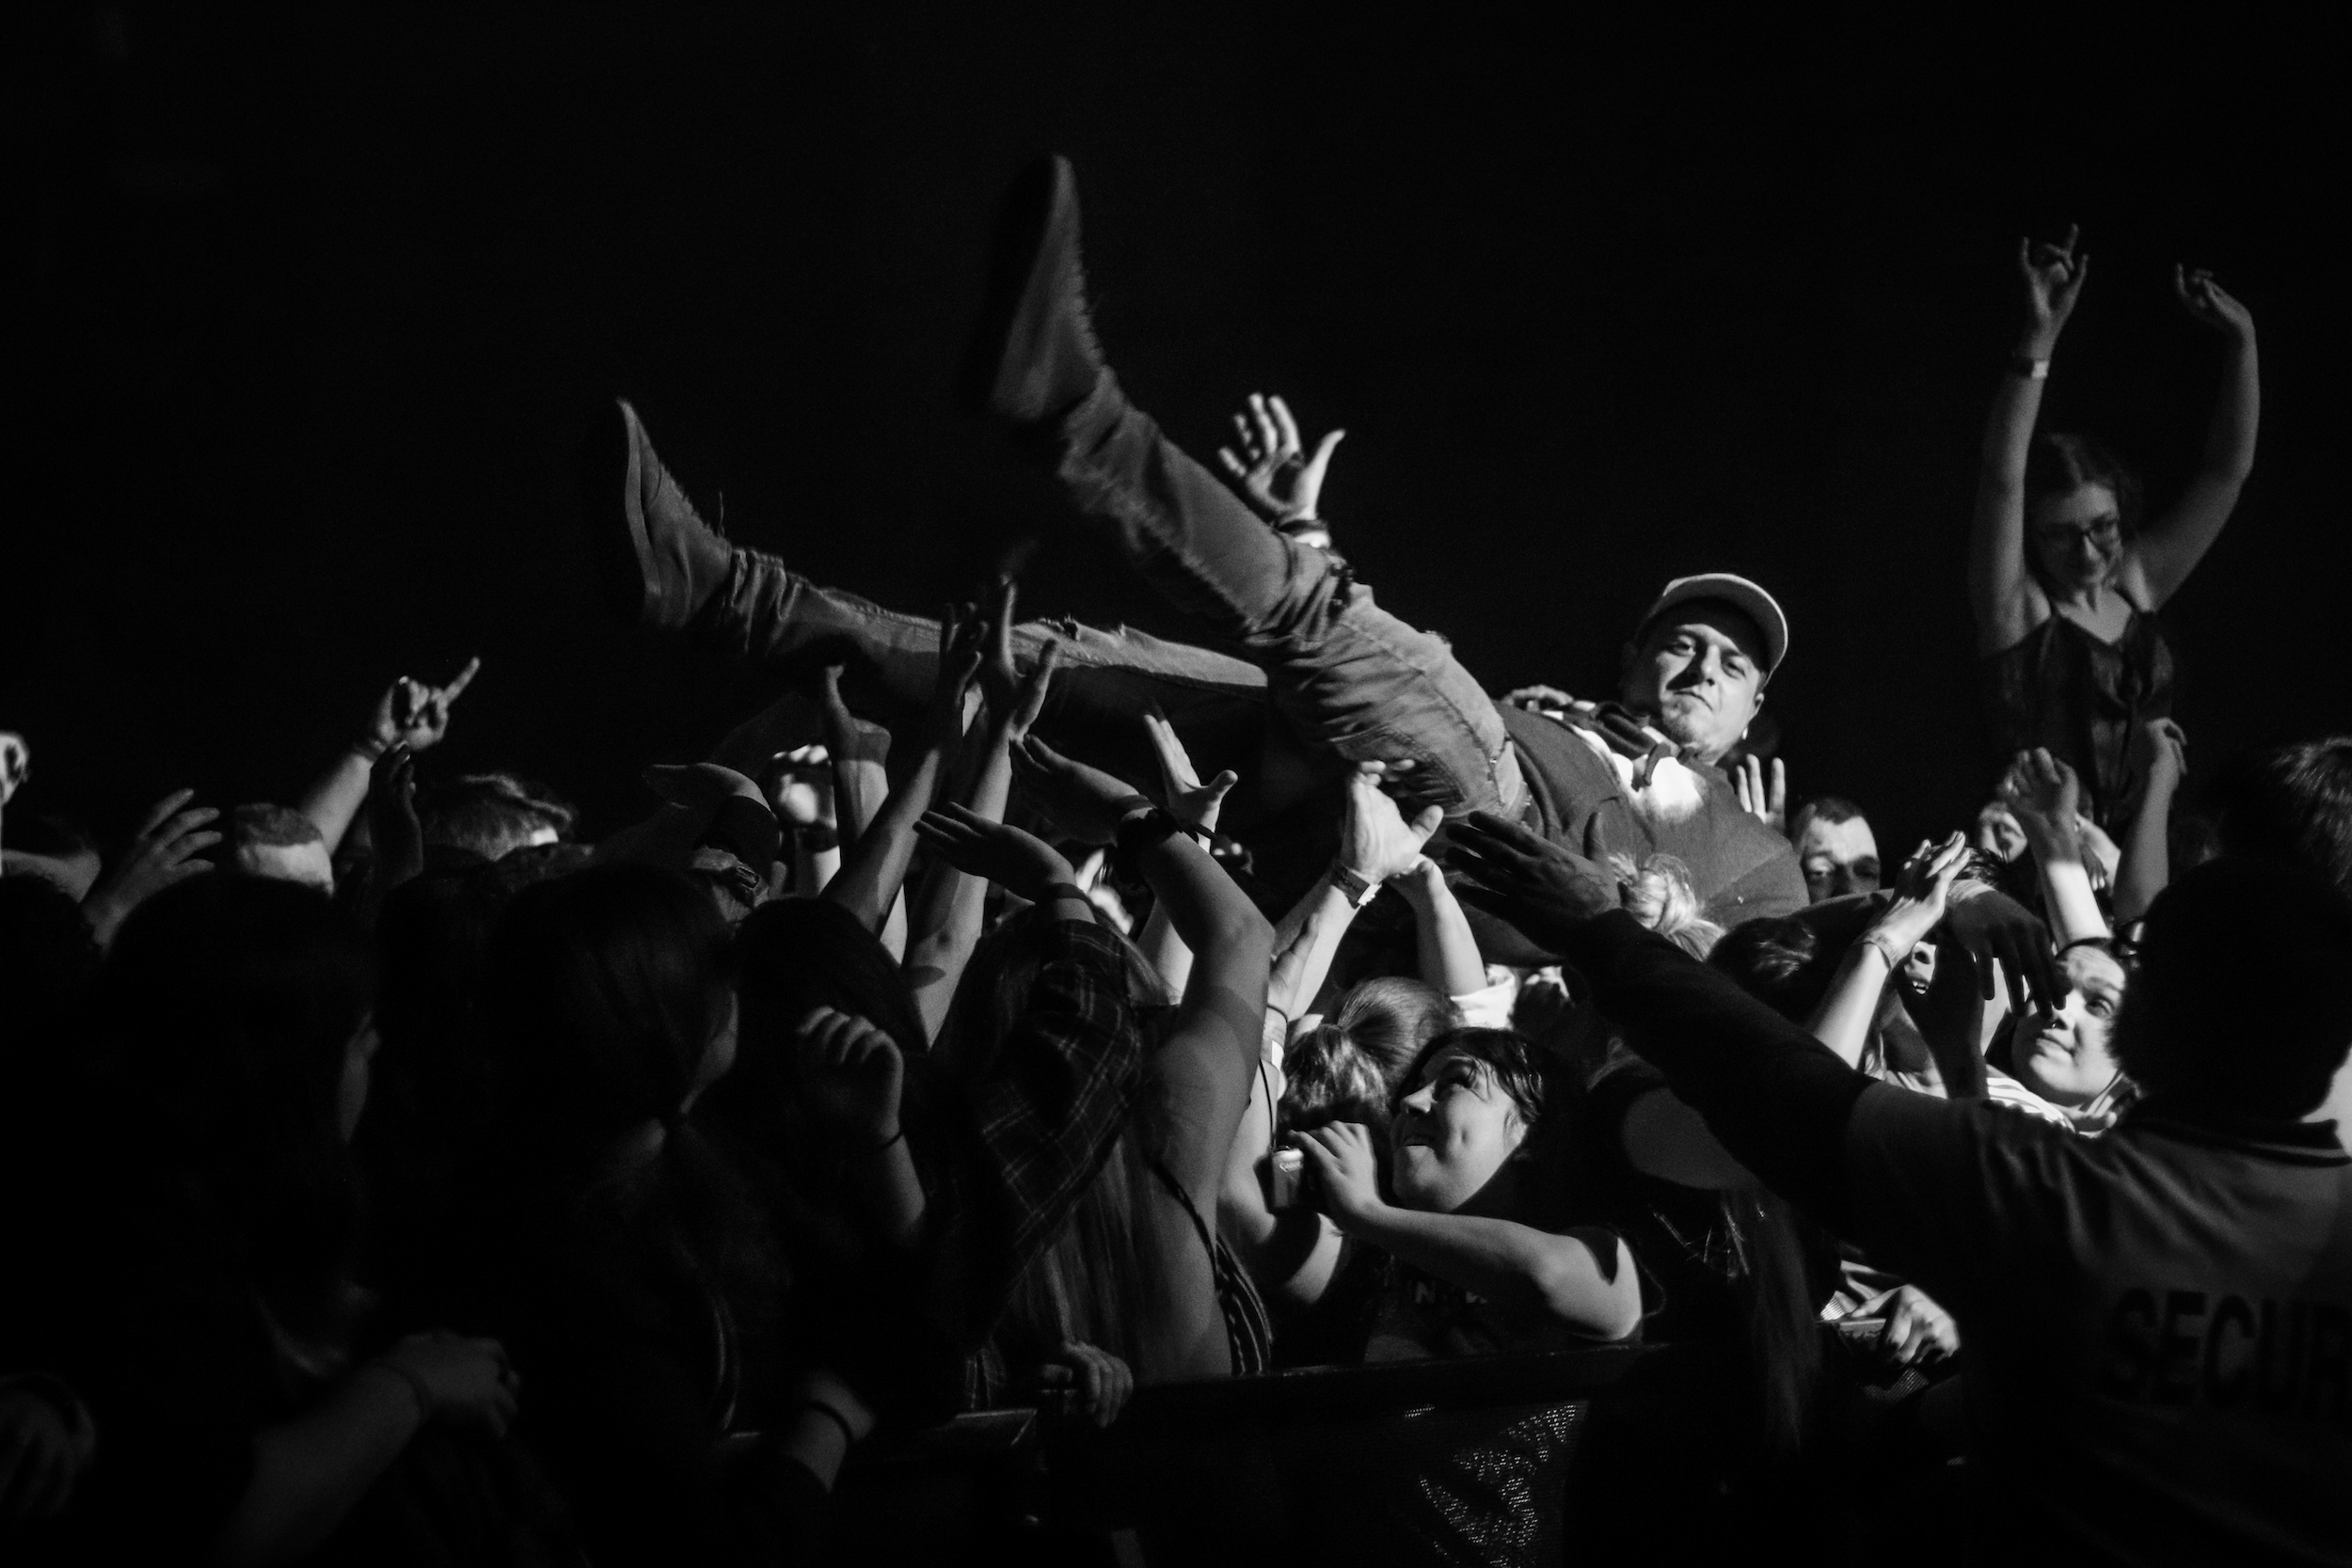 SHOW REVIEW: State Champs Rock Toronto | Highlight Magazine